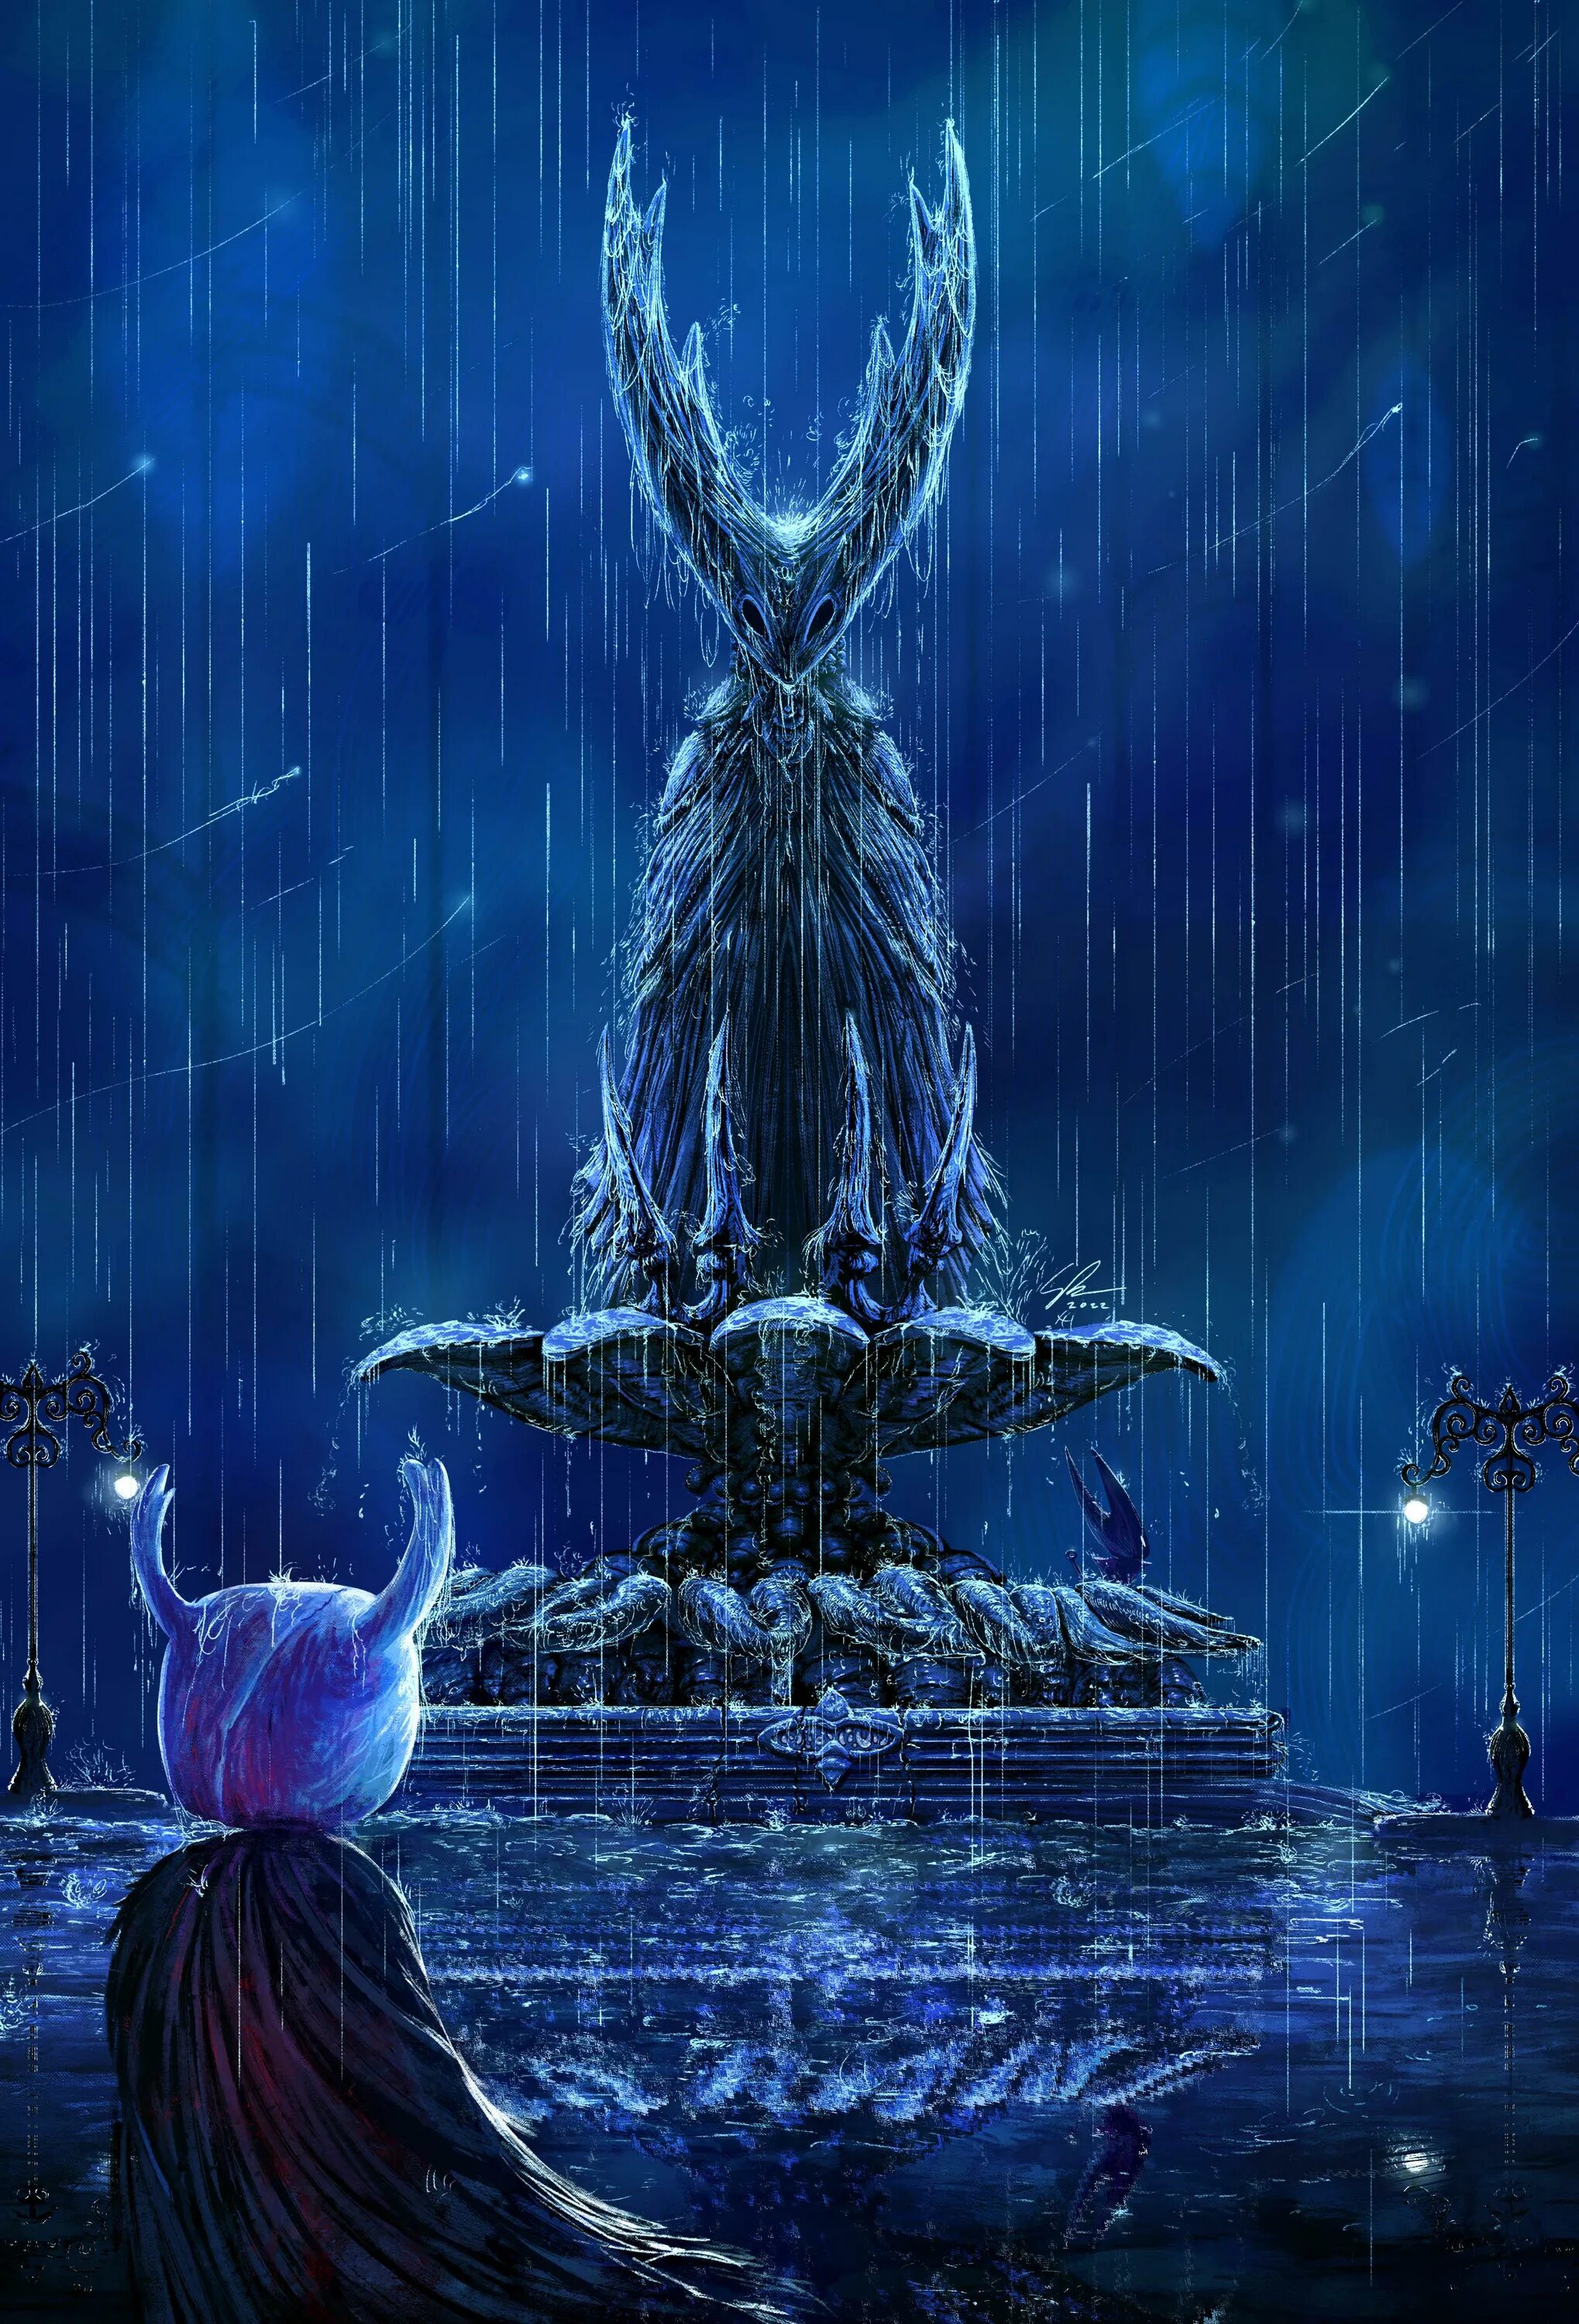 Hollow Knight город City of tears. Холлов кнайт. Hollow Knight город слез. Hollow Knight город слез арт. Коллекционер hollow